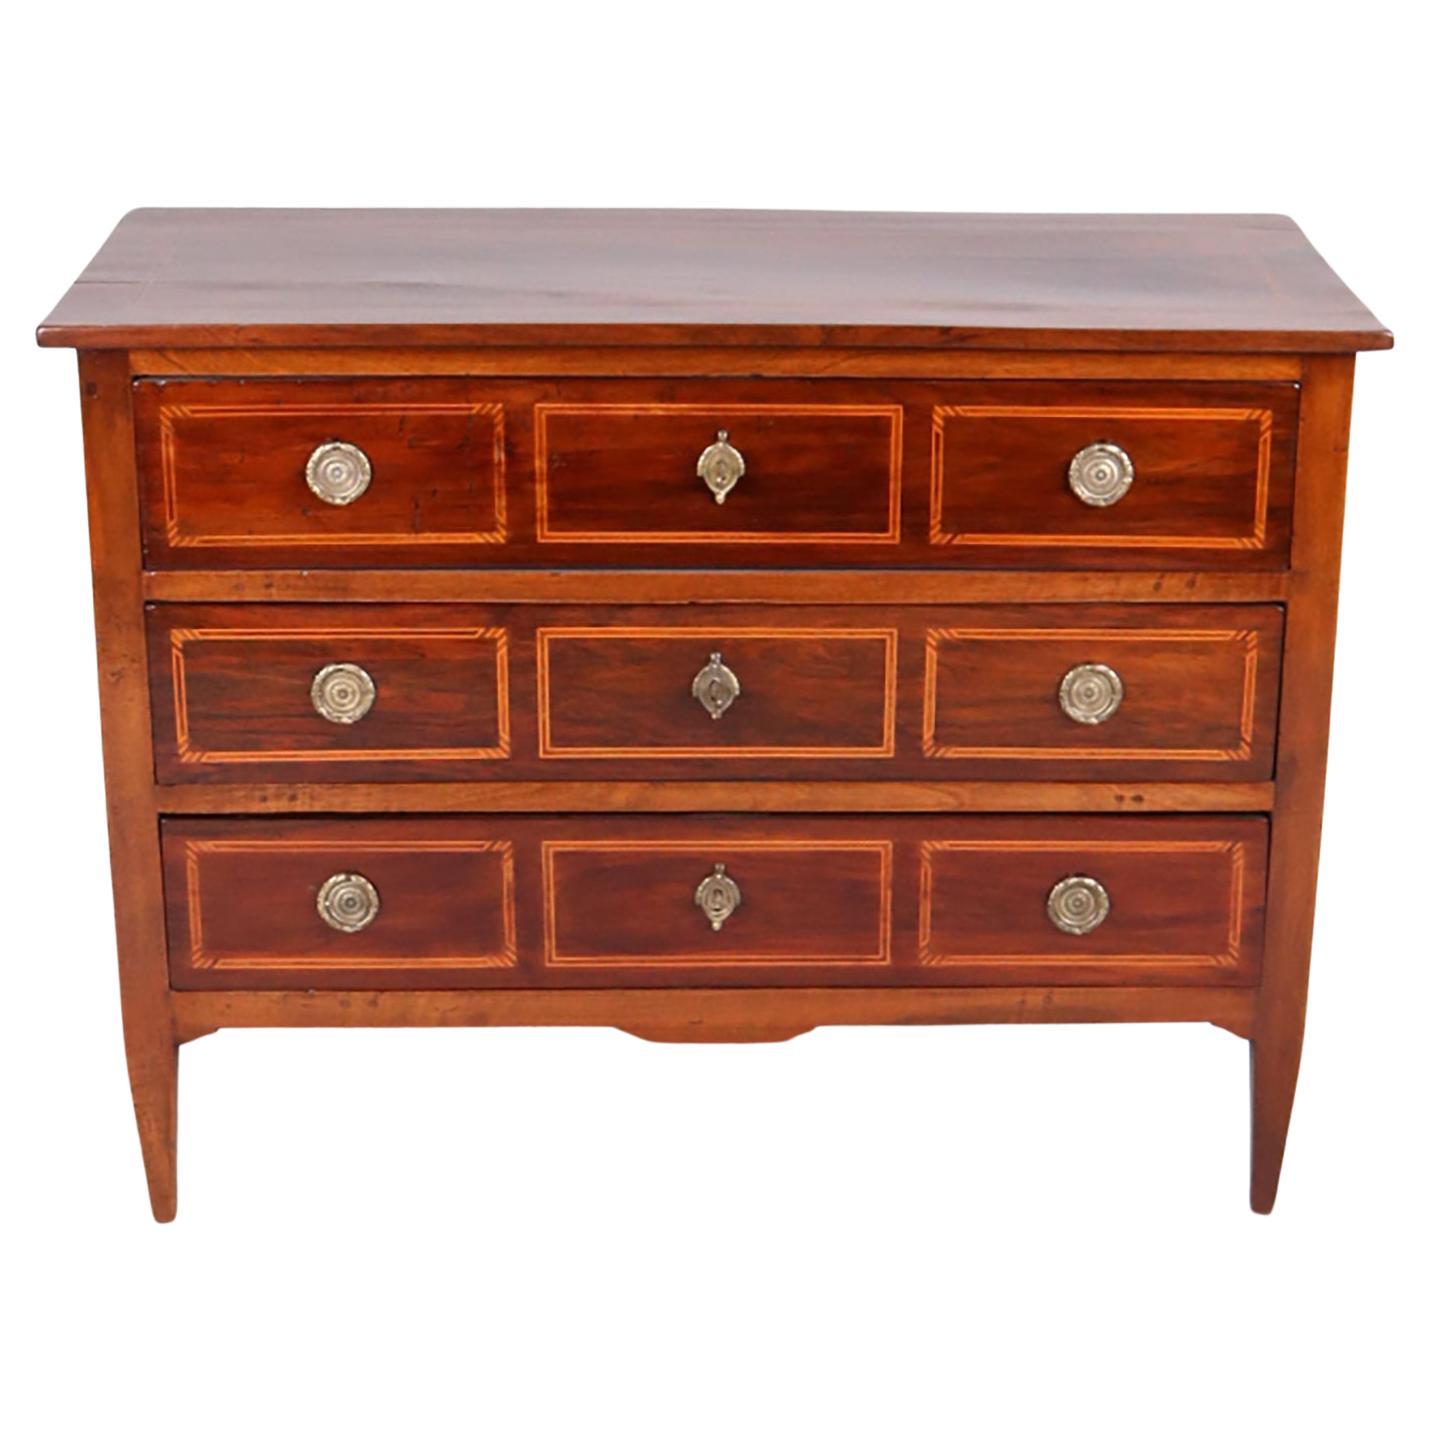 Louis XVI Chest of Drawers from Early 19th Century